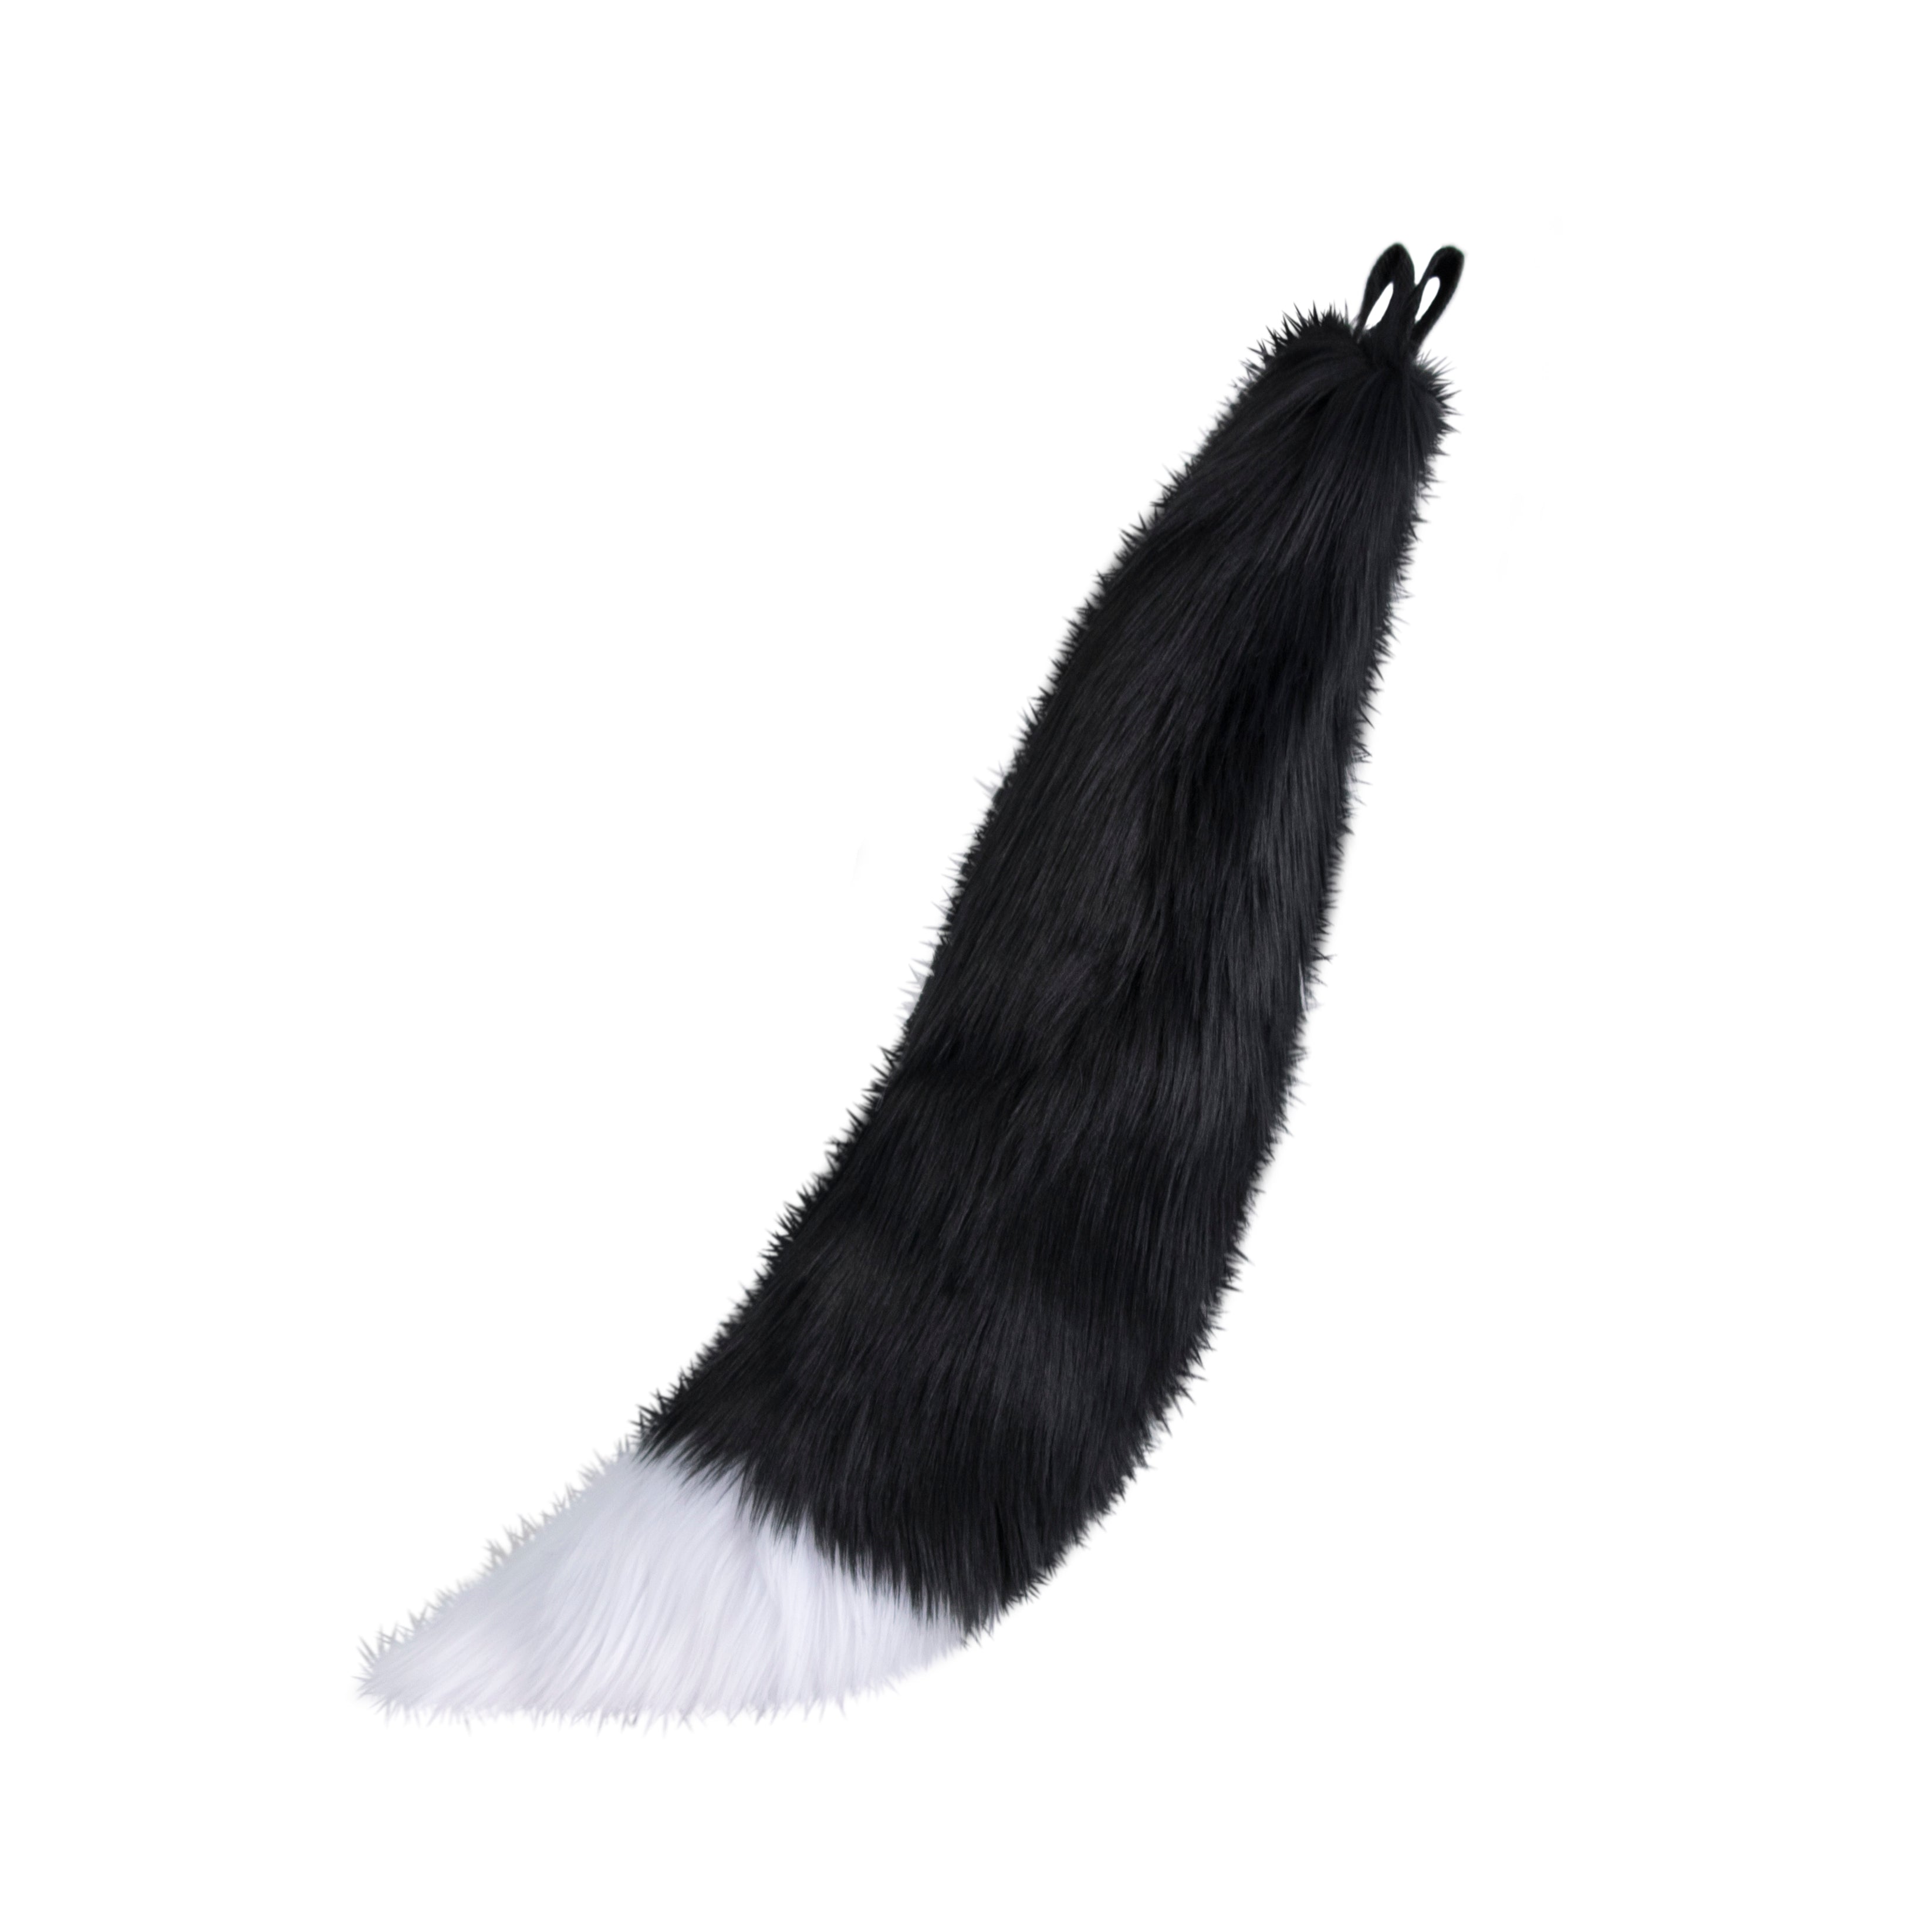 white  Yip Tip Mini Fox Tail by pawstar. Made from vegan friendly faux fur. Perfect for halloween costumes cosplay and more. Made in the USA